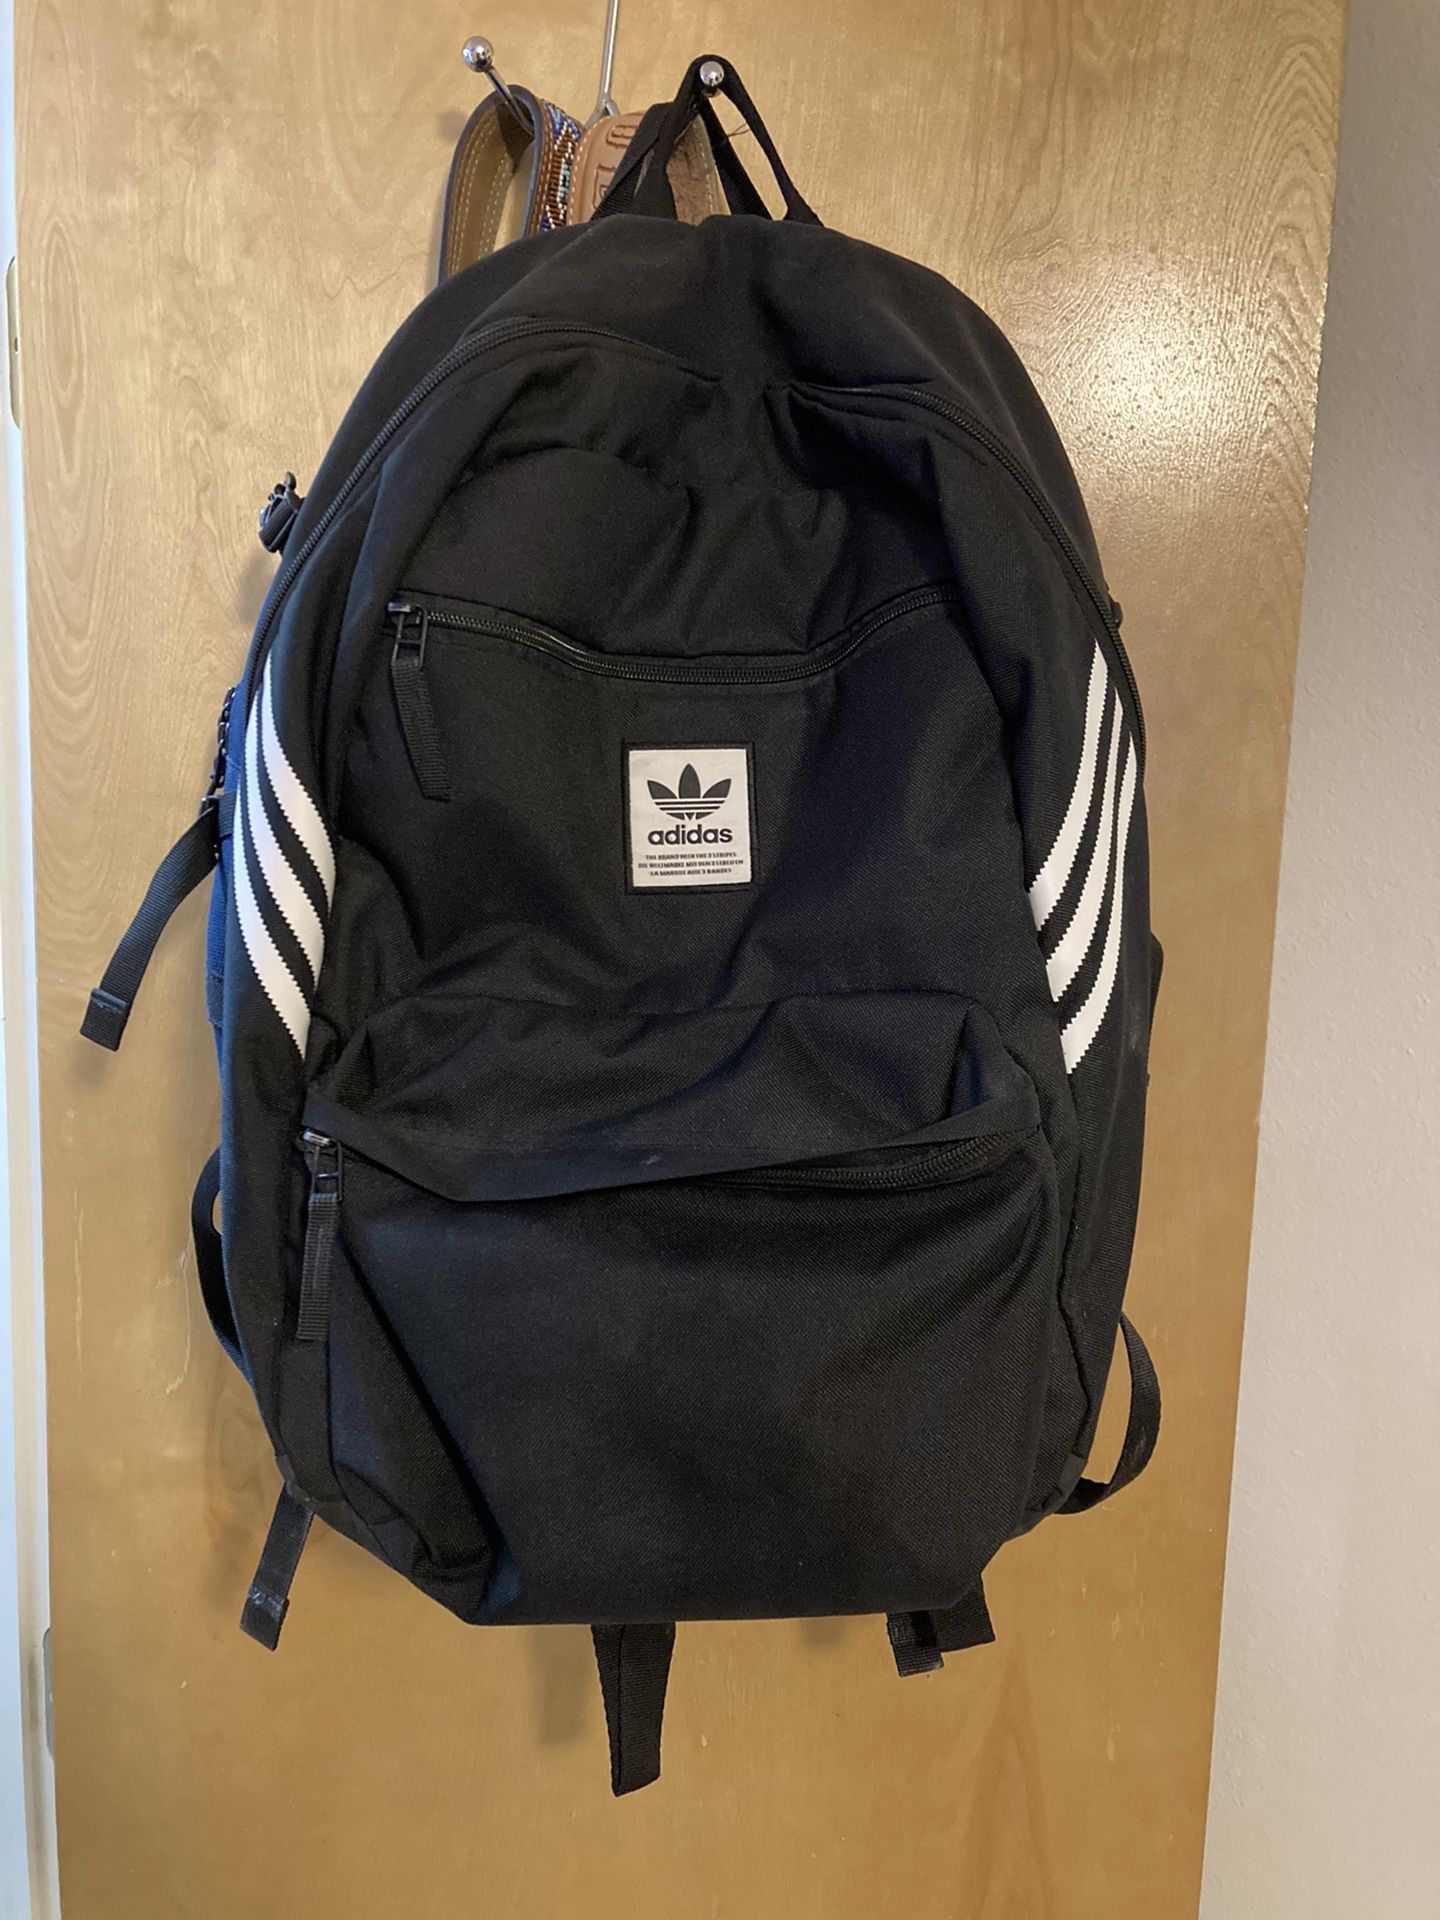 Black Addidas Backpack, Great Condition 